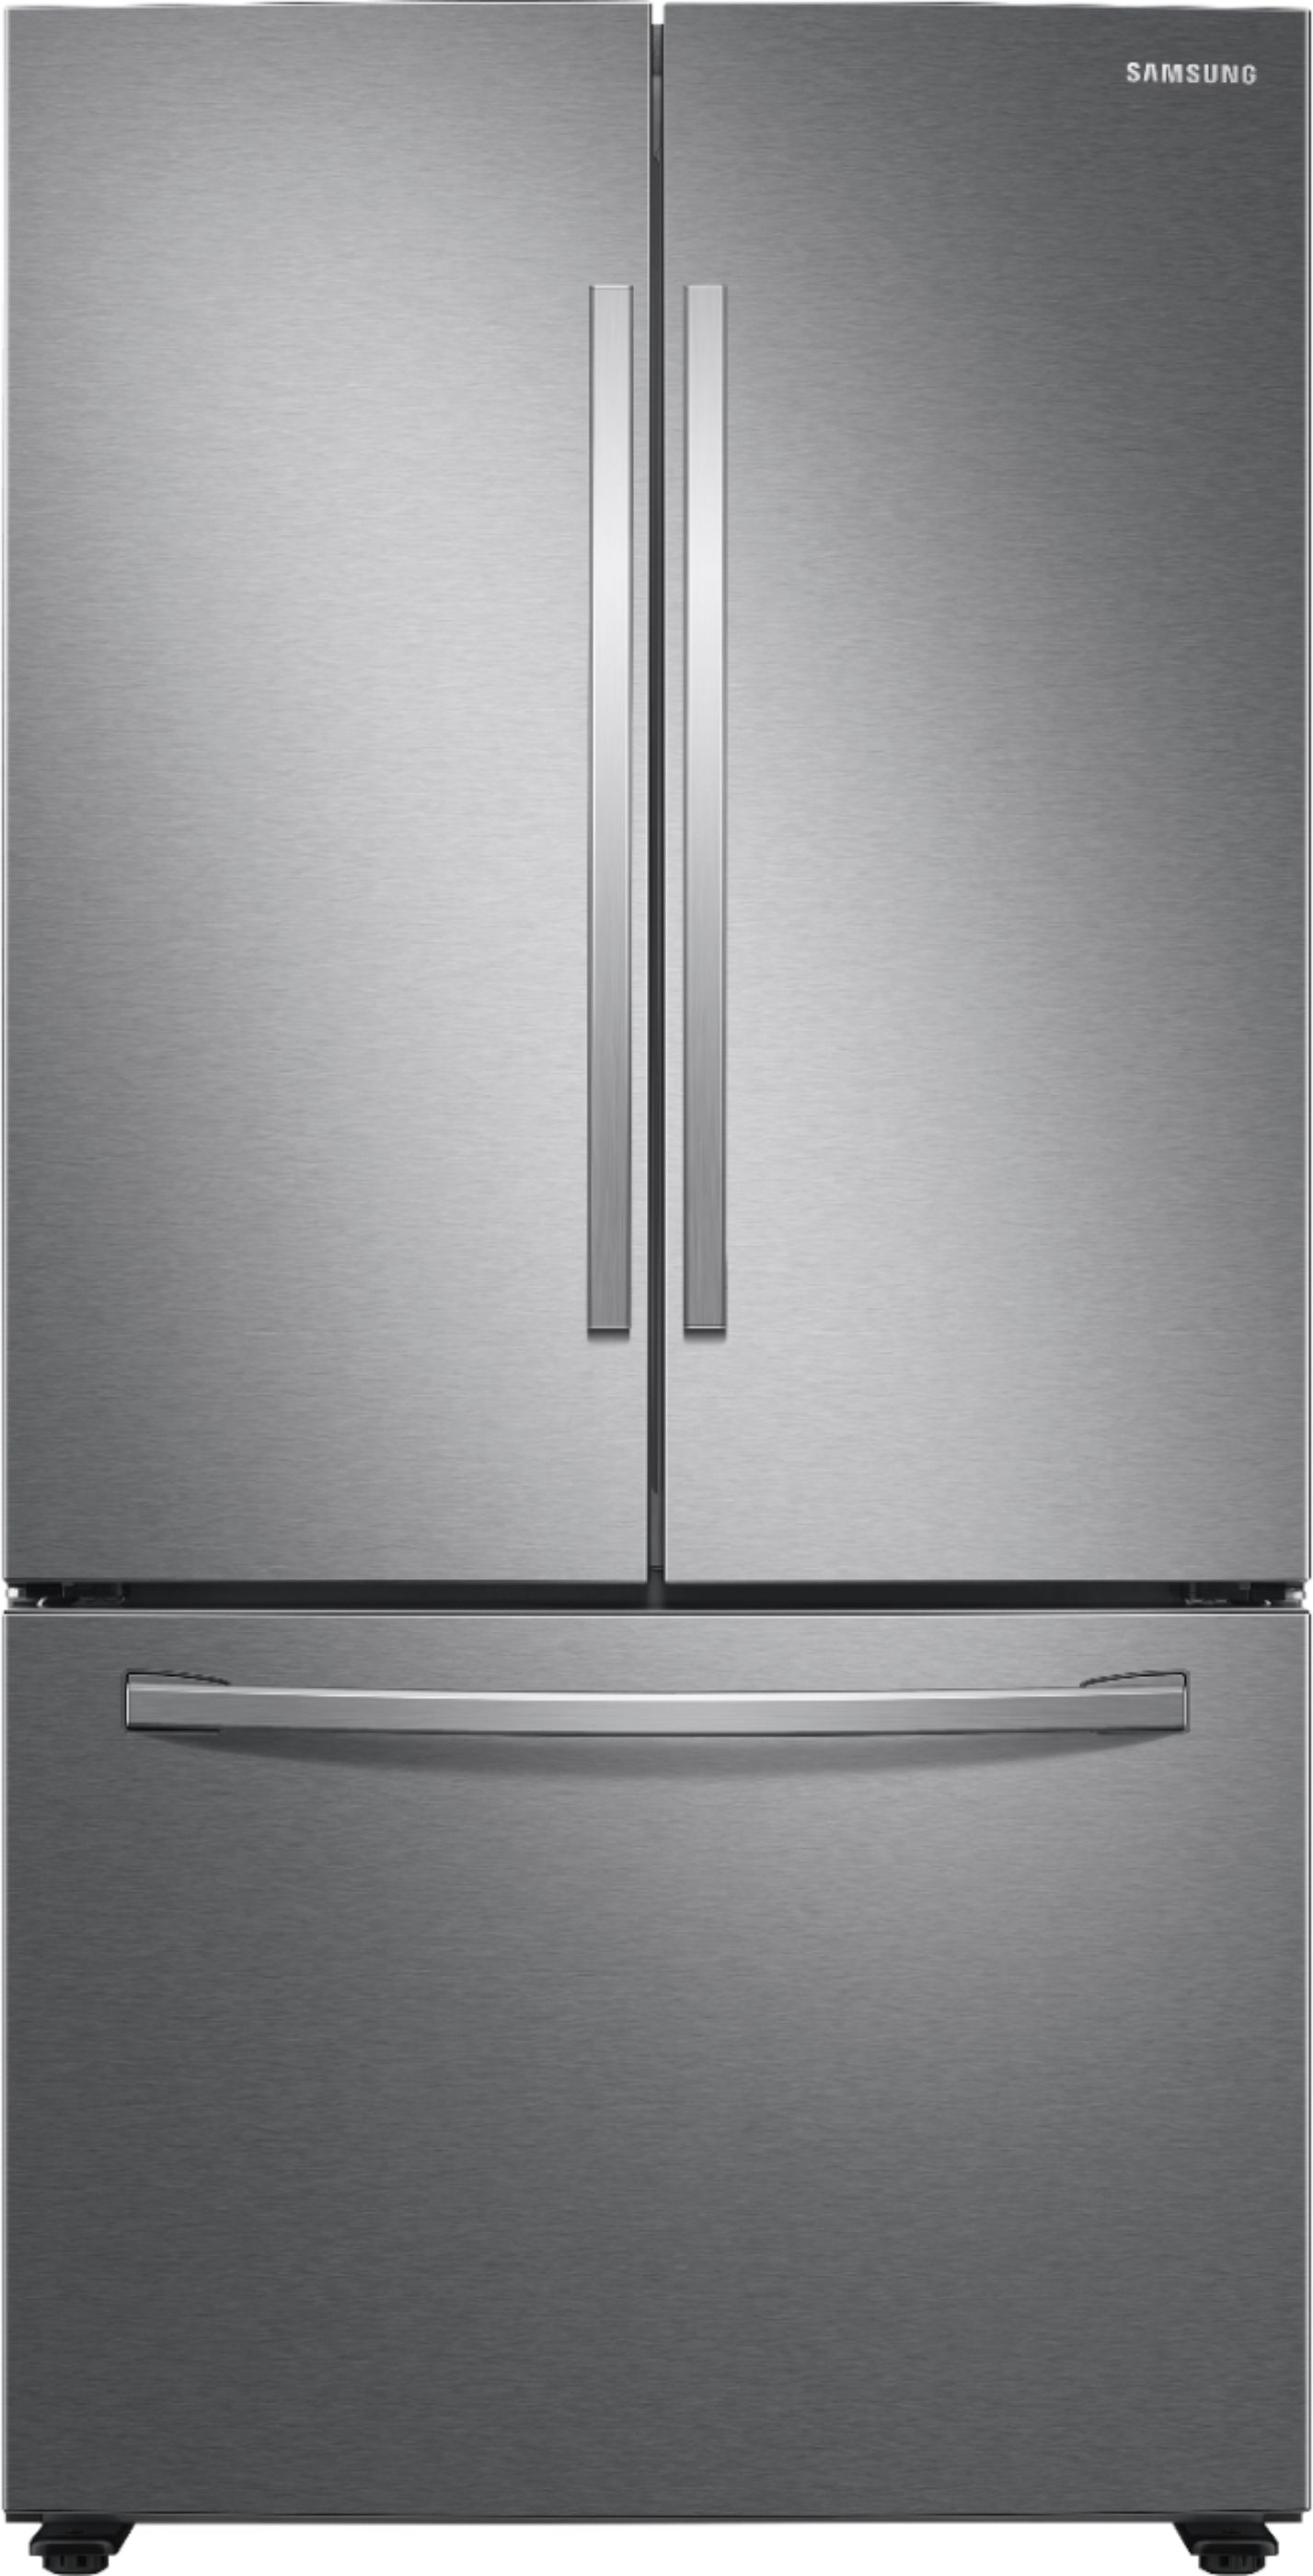 Samsung - 28 cu. ft. Large Capacity 3-Door French Door Refrigerator with AutoFill Water Pitcher - Stainless steel